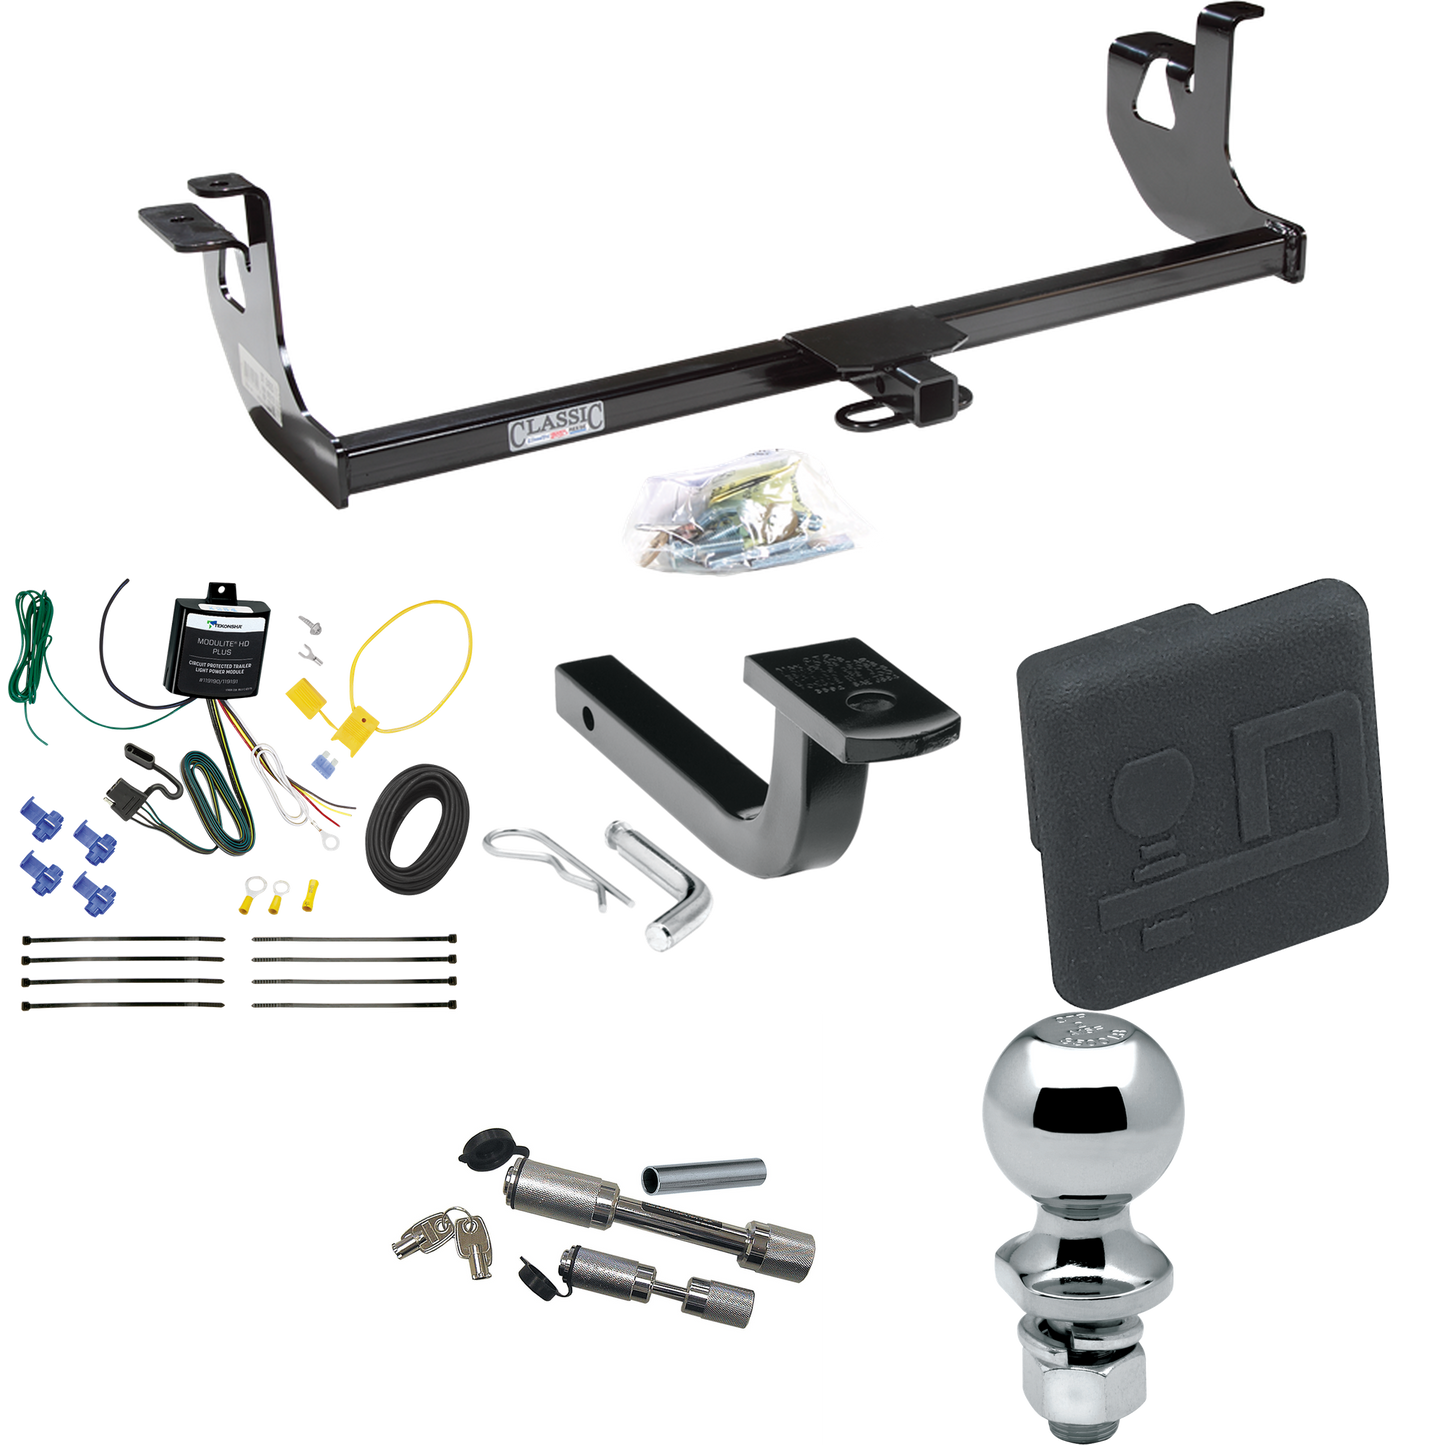 Fits 2006-2009 Volkswagen GTI Trailer Hitch Tow PKG w/ 4-Flat Wiring Harness + Draw-Bar + 2" Ball + Hitch Cover + Dual Hitch & Coupler Locks (For 2 Dr. Hatchback Models) By Draw-Tite